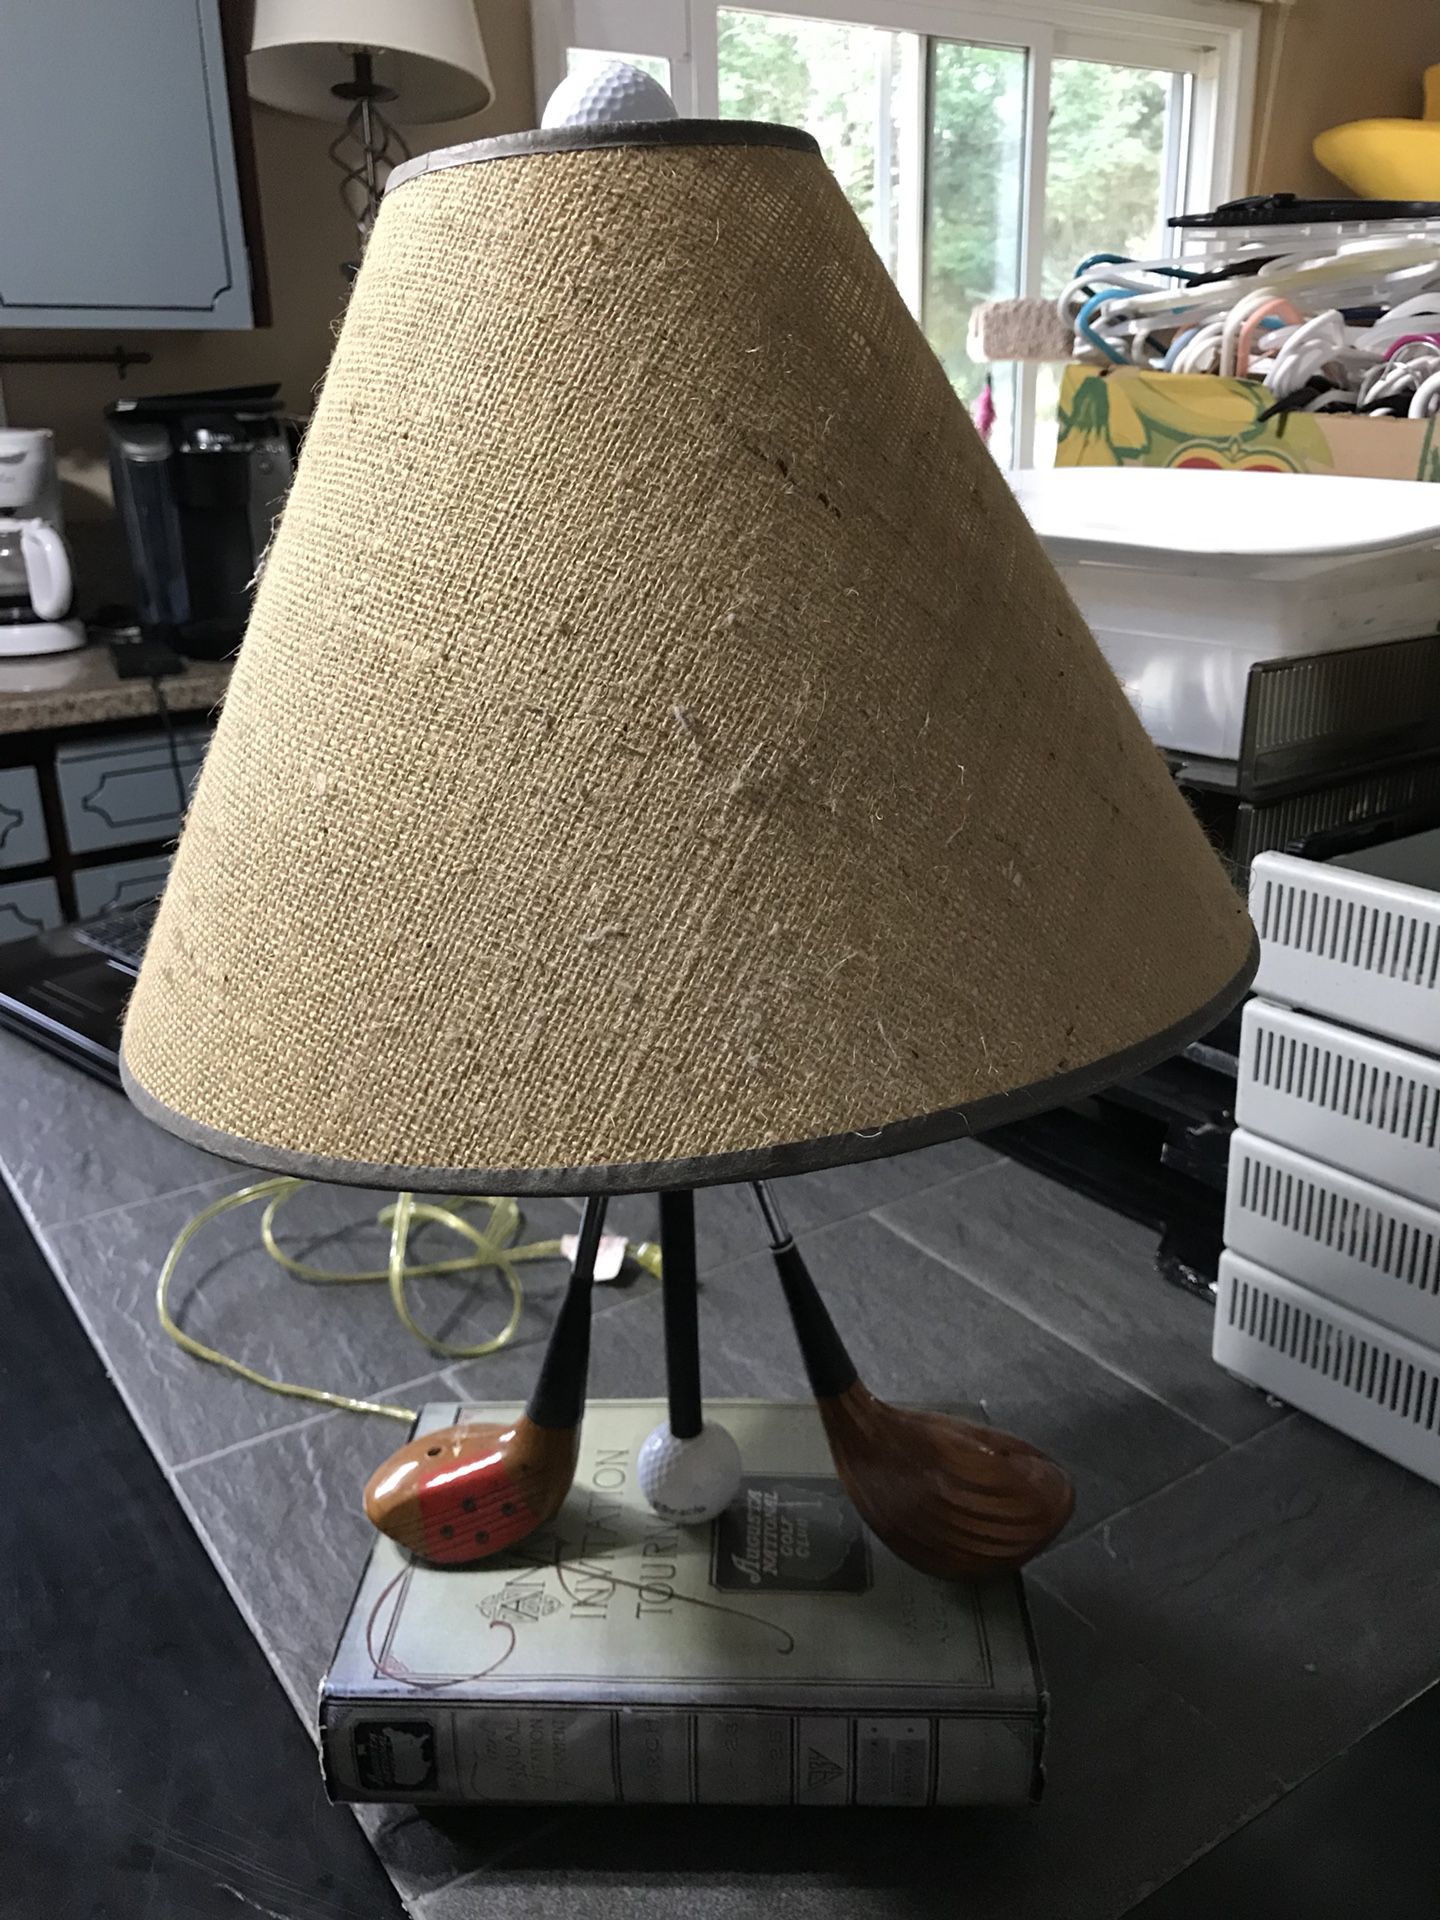 LAMP - Unique Golf Theme - FATHER’S DAY GIFT!!!